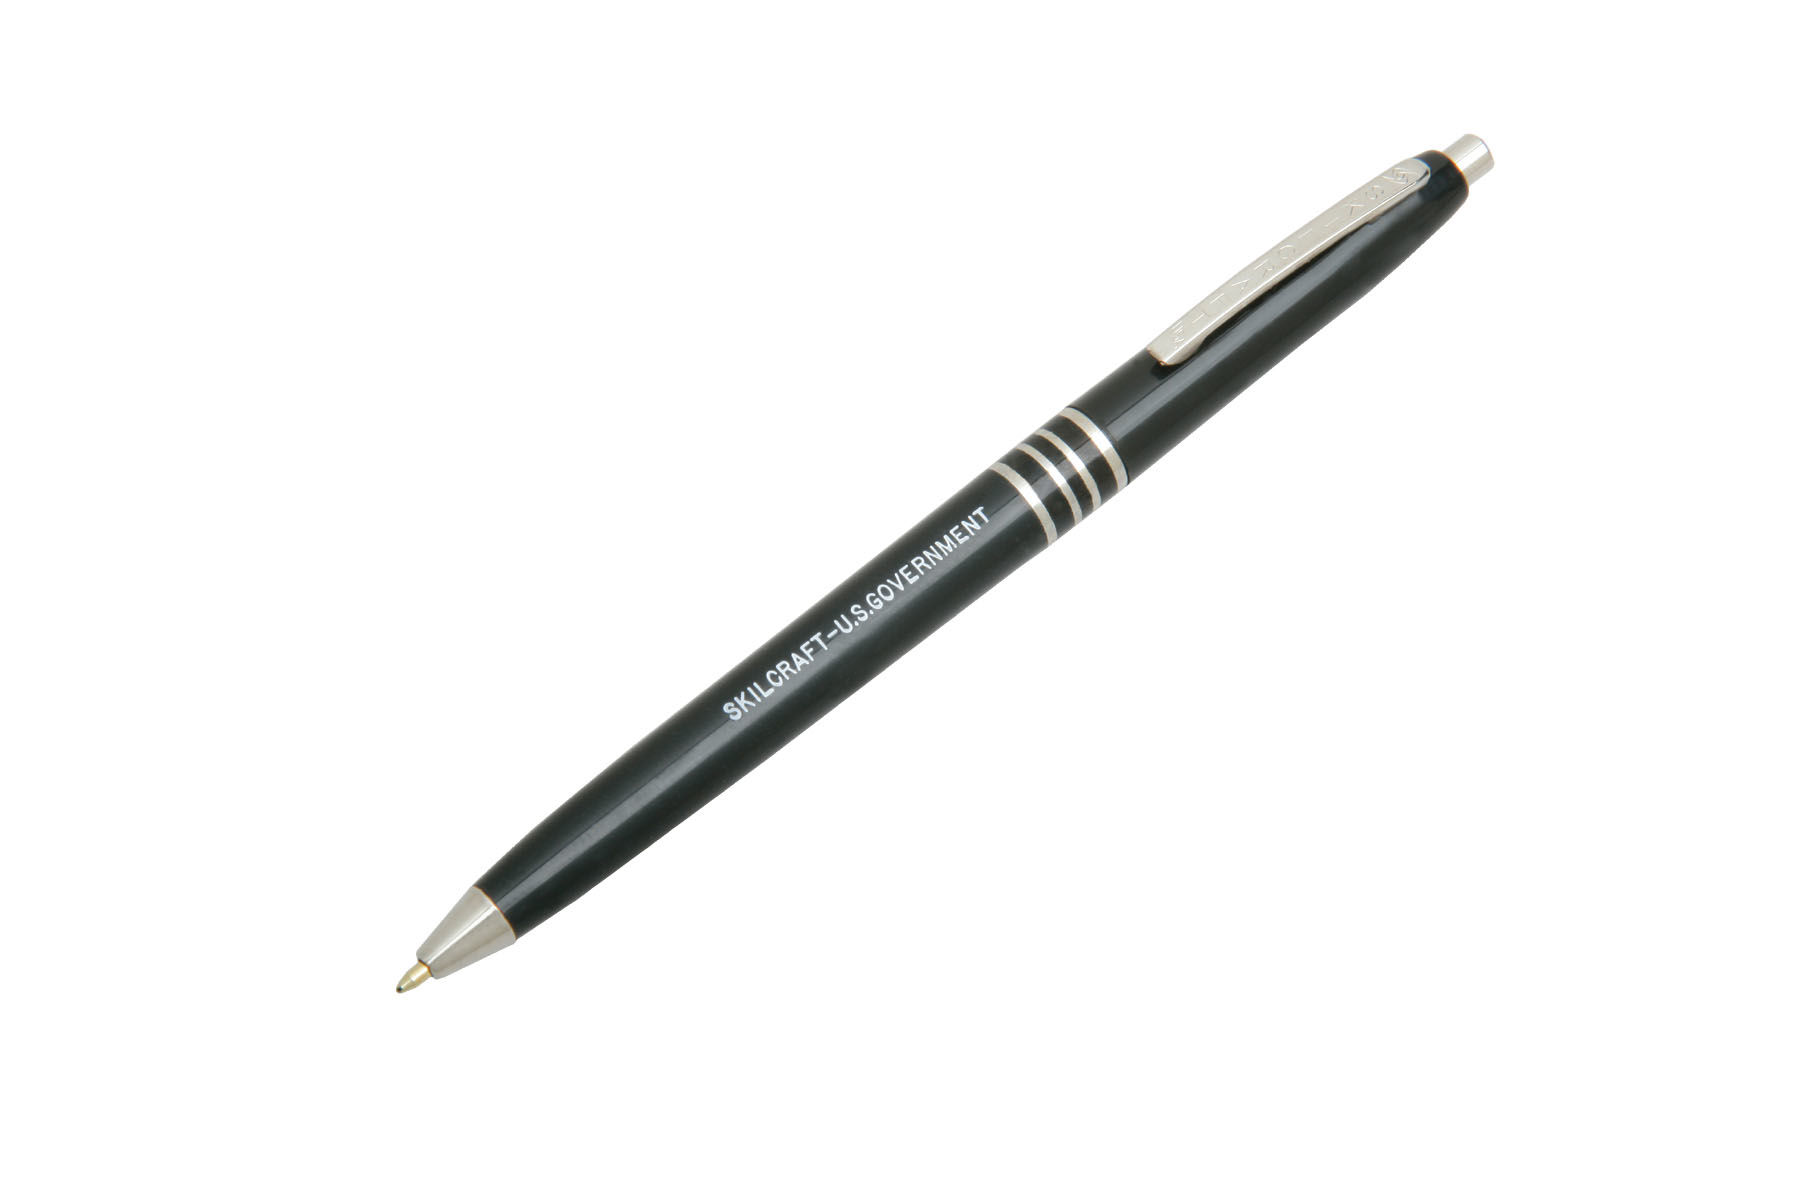 The trusty Skilcraft "government pen," was originally designed to meet stringent government and military standards. Under those initial specs, it was designed to write without fail from the North Pole to Death Valley. (Courtesy National Industries for the Blind)